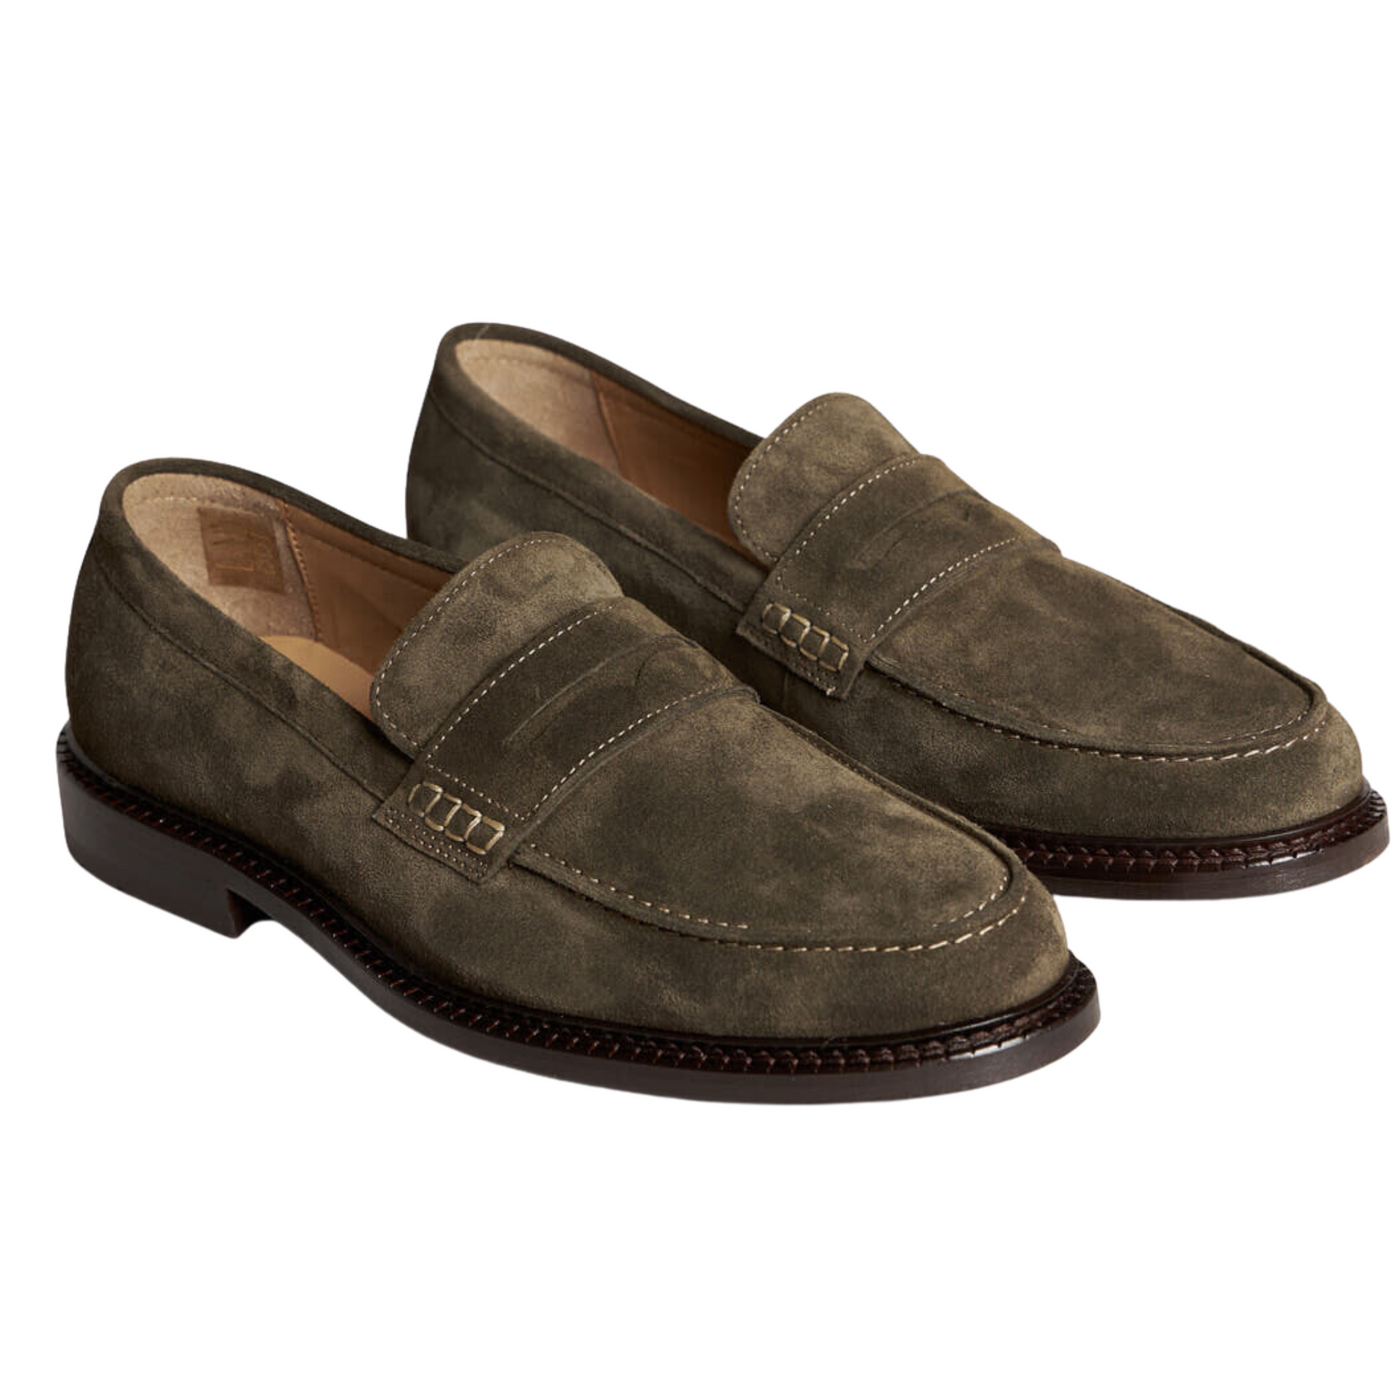 Ahler Loafers Rust 30859